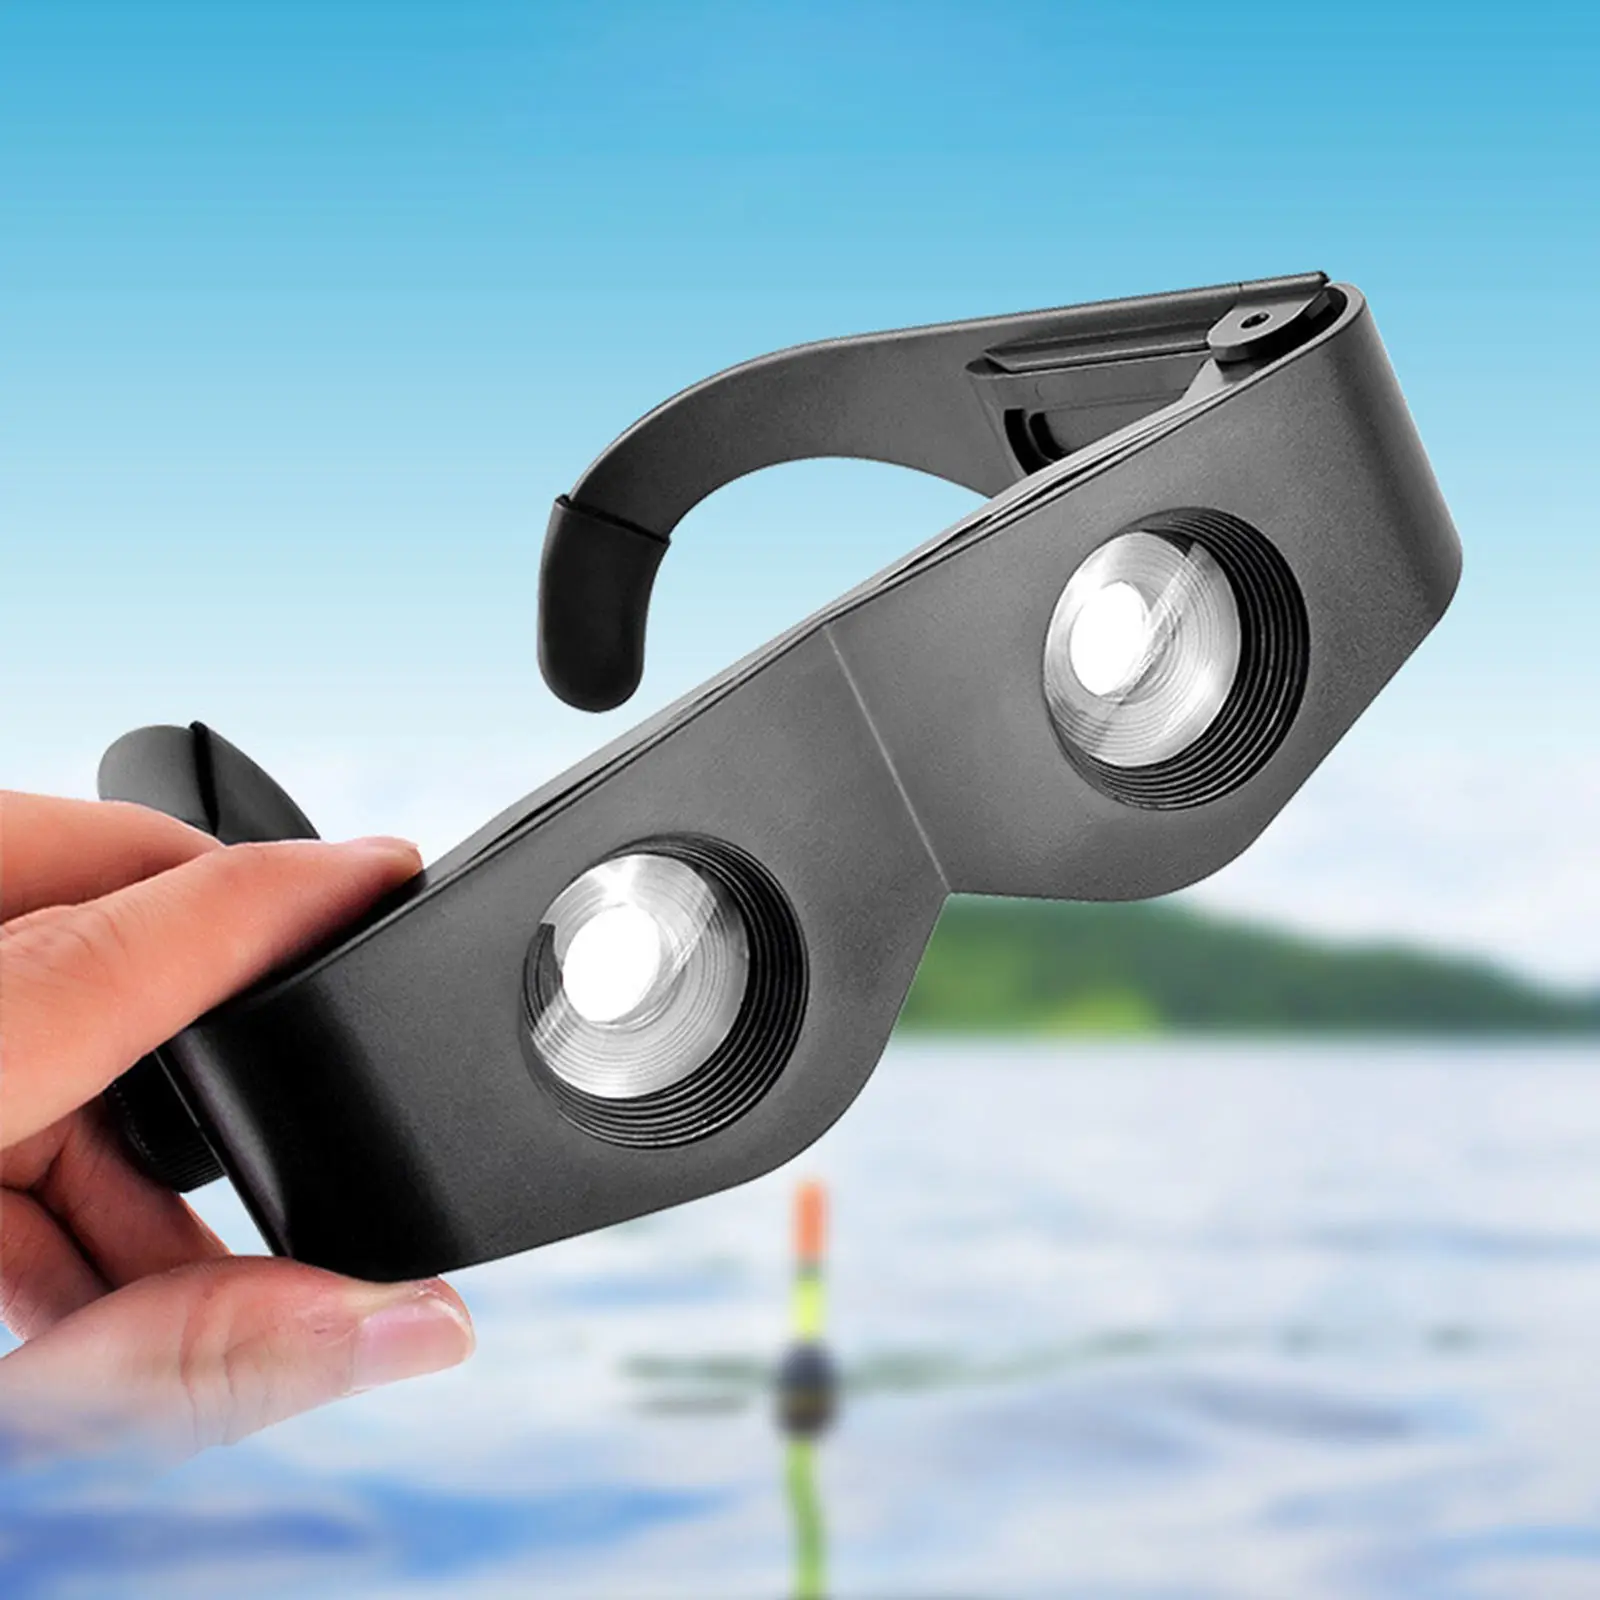 Fishing Binoculars Glasses Magnifying Telescope for Bird Watching Sports Concerts Adults Kids Outdoor Hands Free Glasses